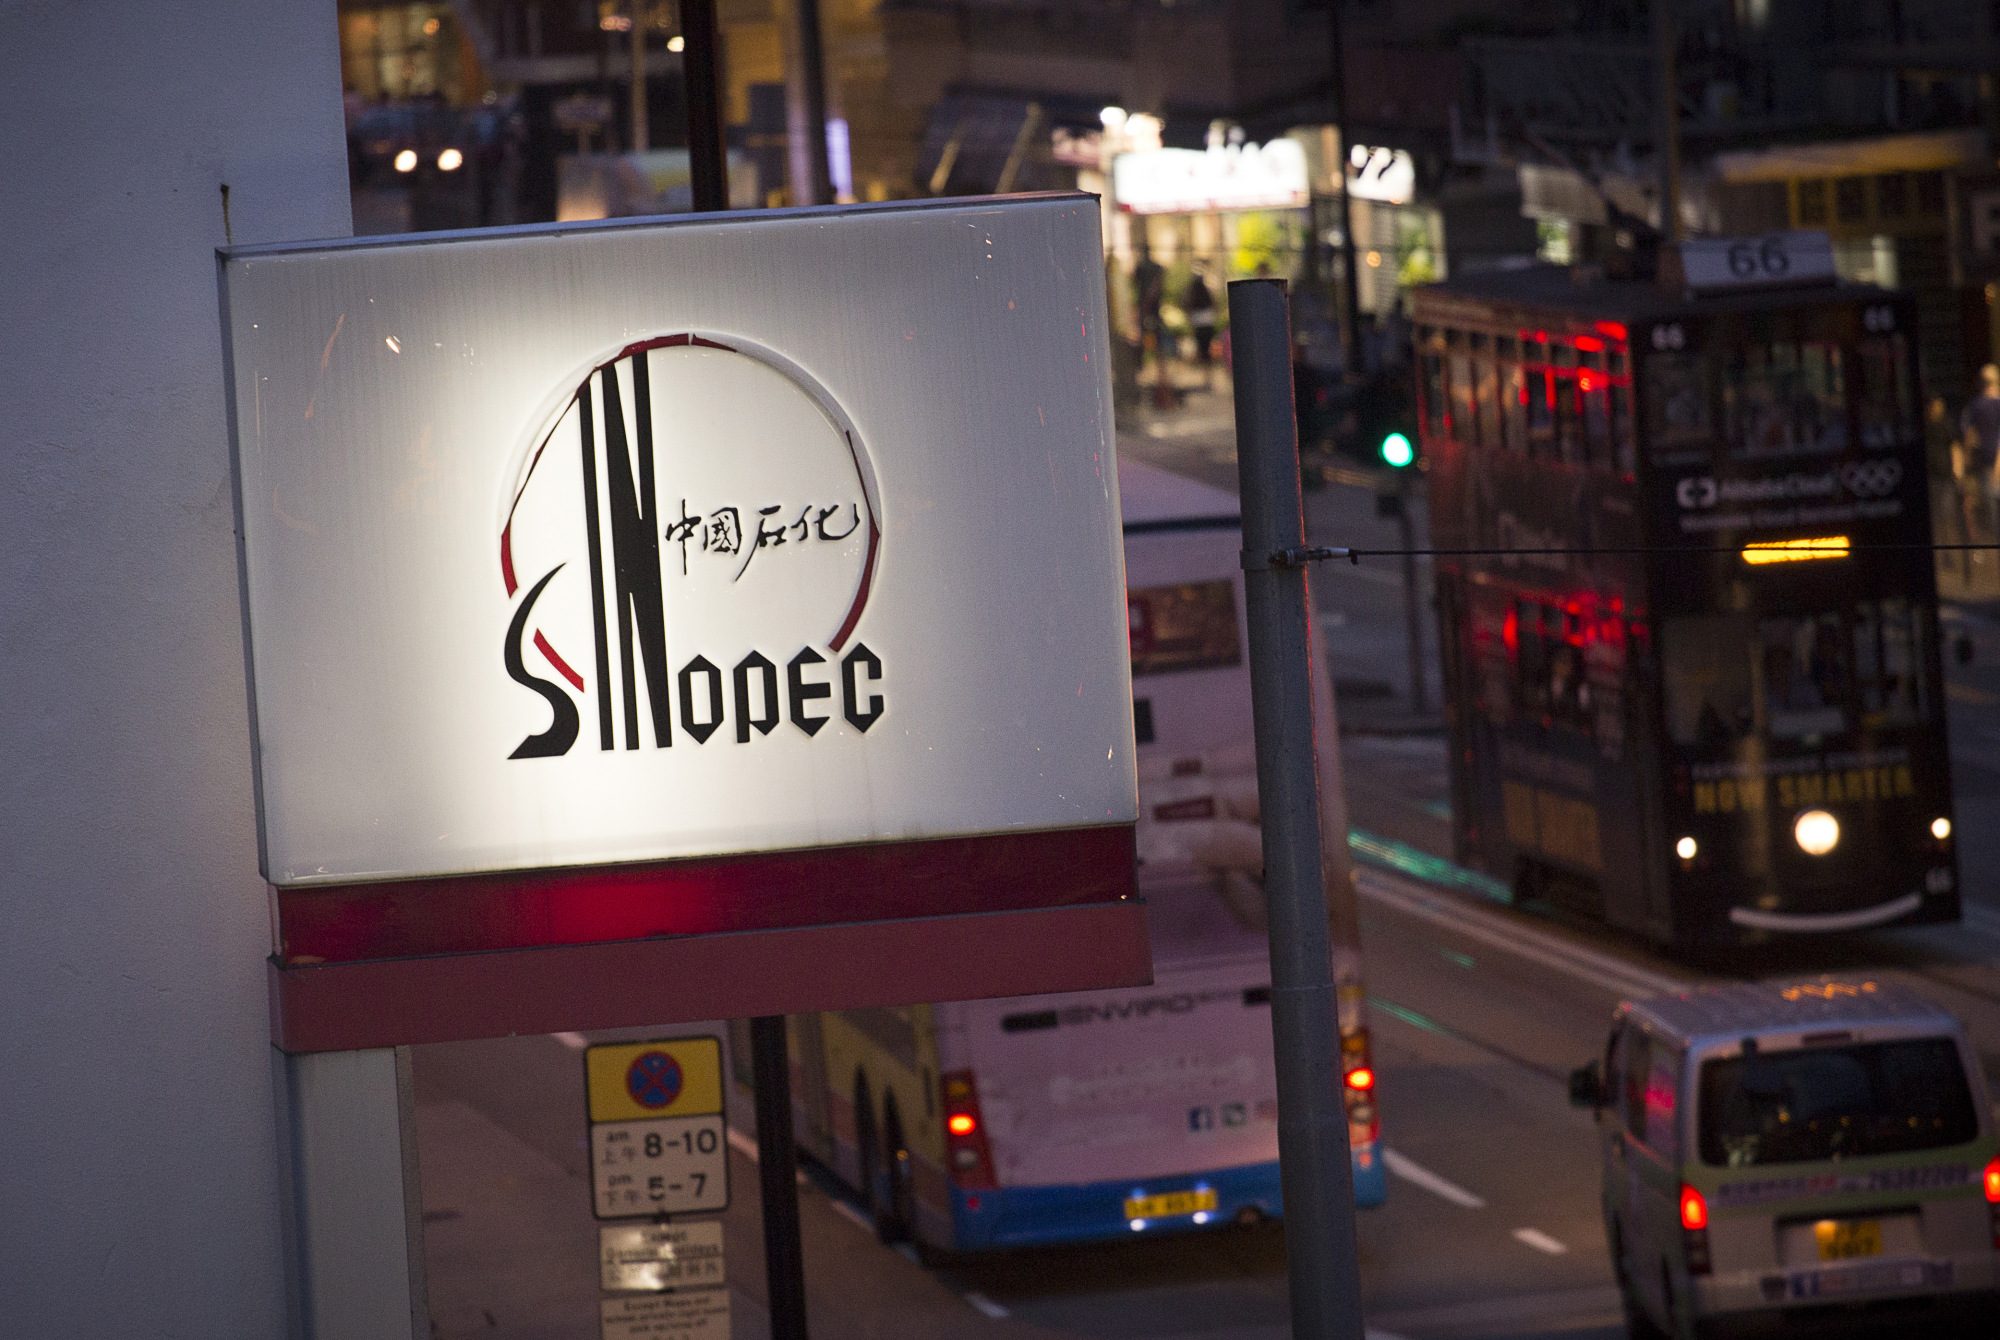 China's Sinopec said to secure Cabinet nod for retail unit IPO